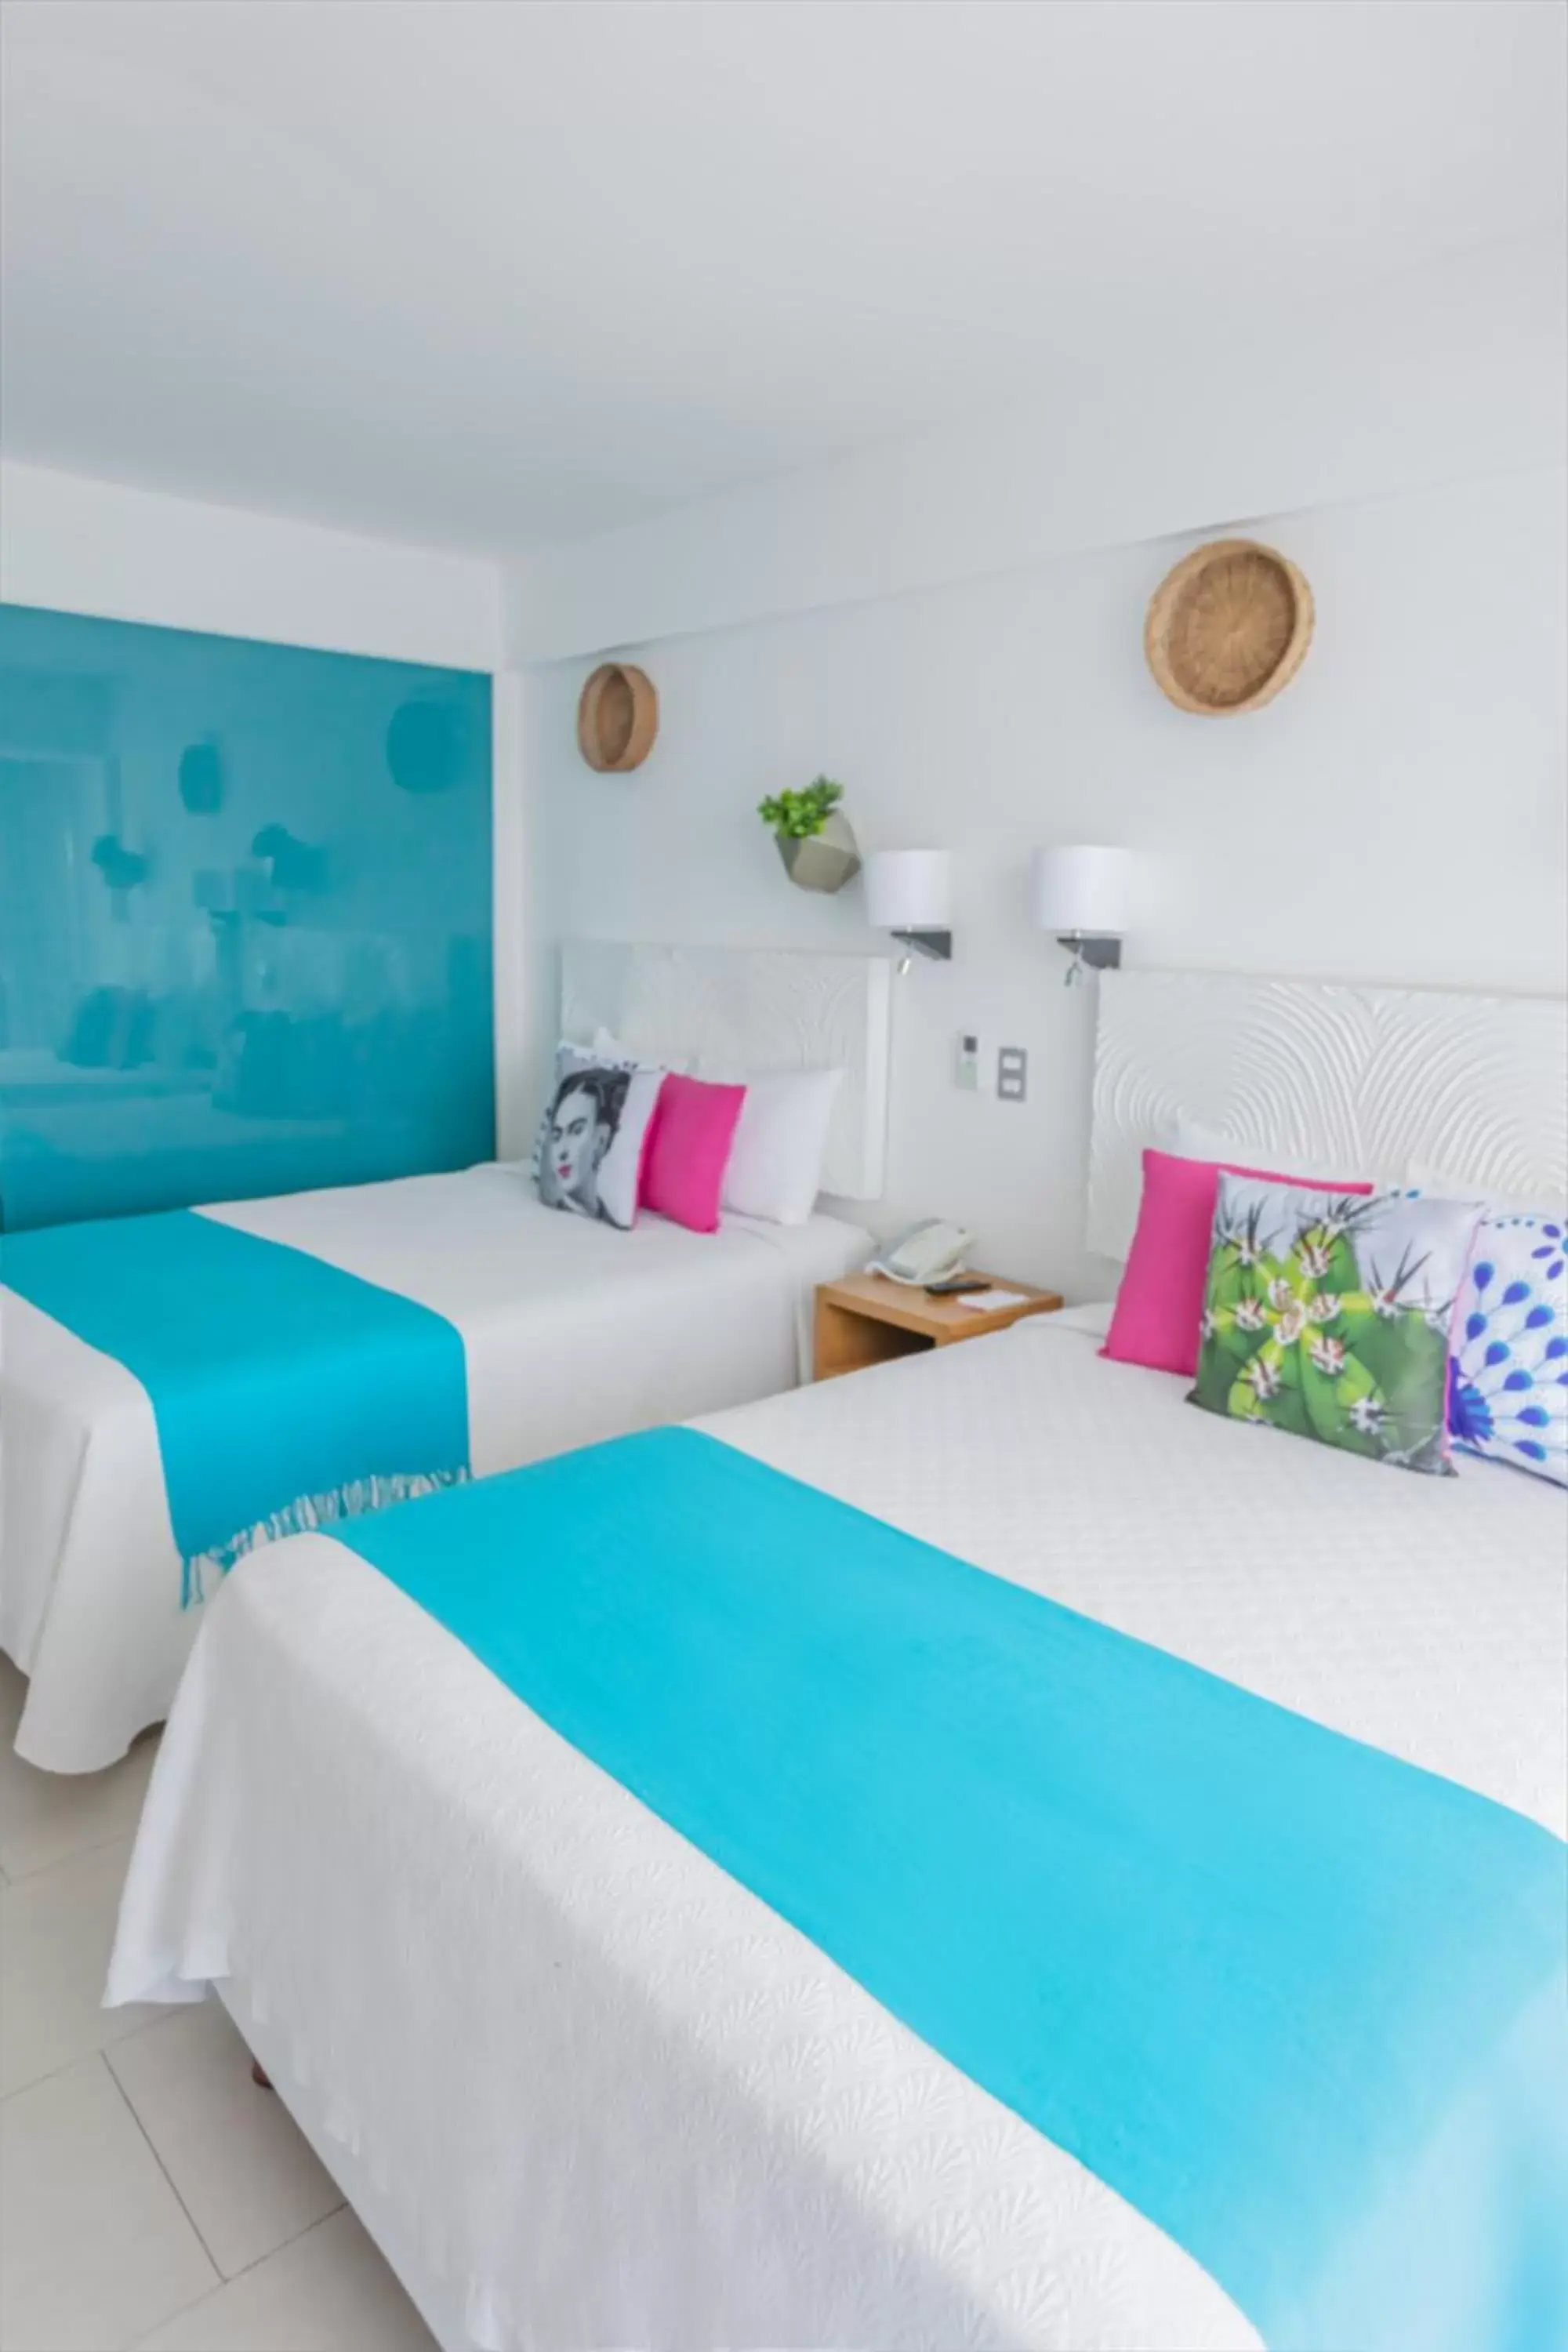 Bed in Mia Reef Isla Mujeres Cancun All Inclusive Resort